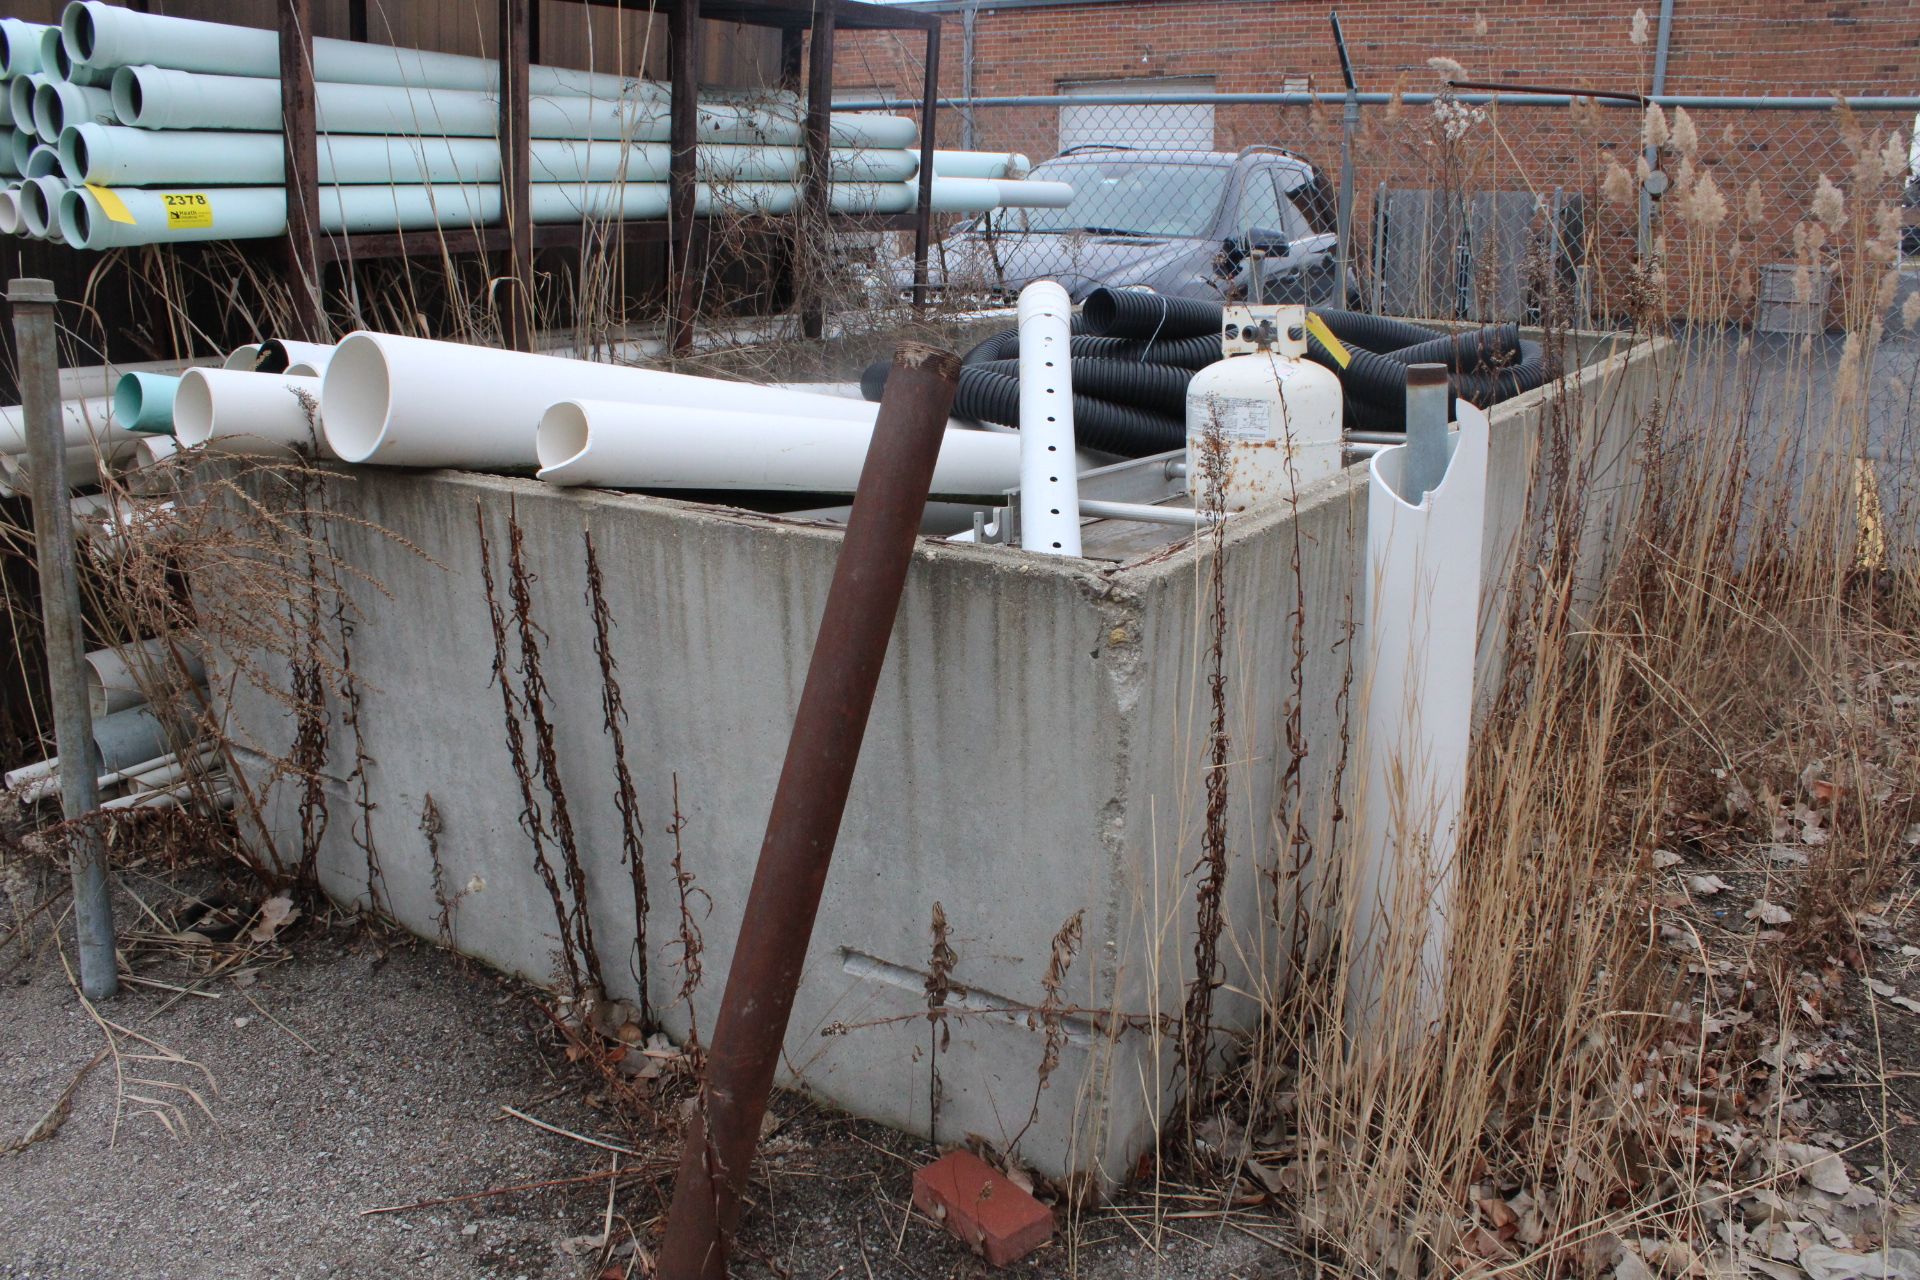 CONCRETE CONTAINER, WITH CONTENTS, SCAFFOLDING, PVC, CORRUGATED DRAIN PIPE, PROPANE TANK, ETC. - Image 4 of 4